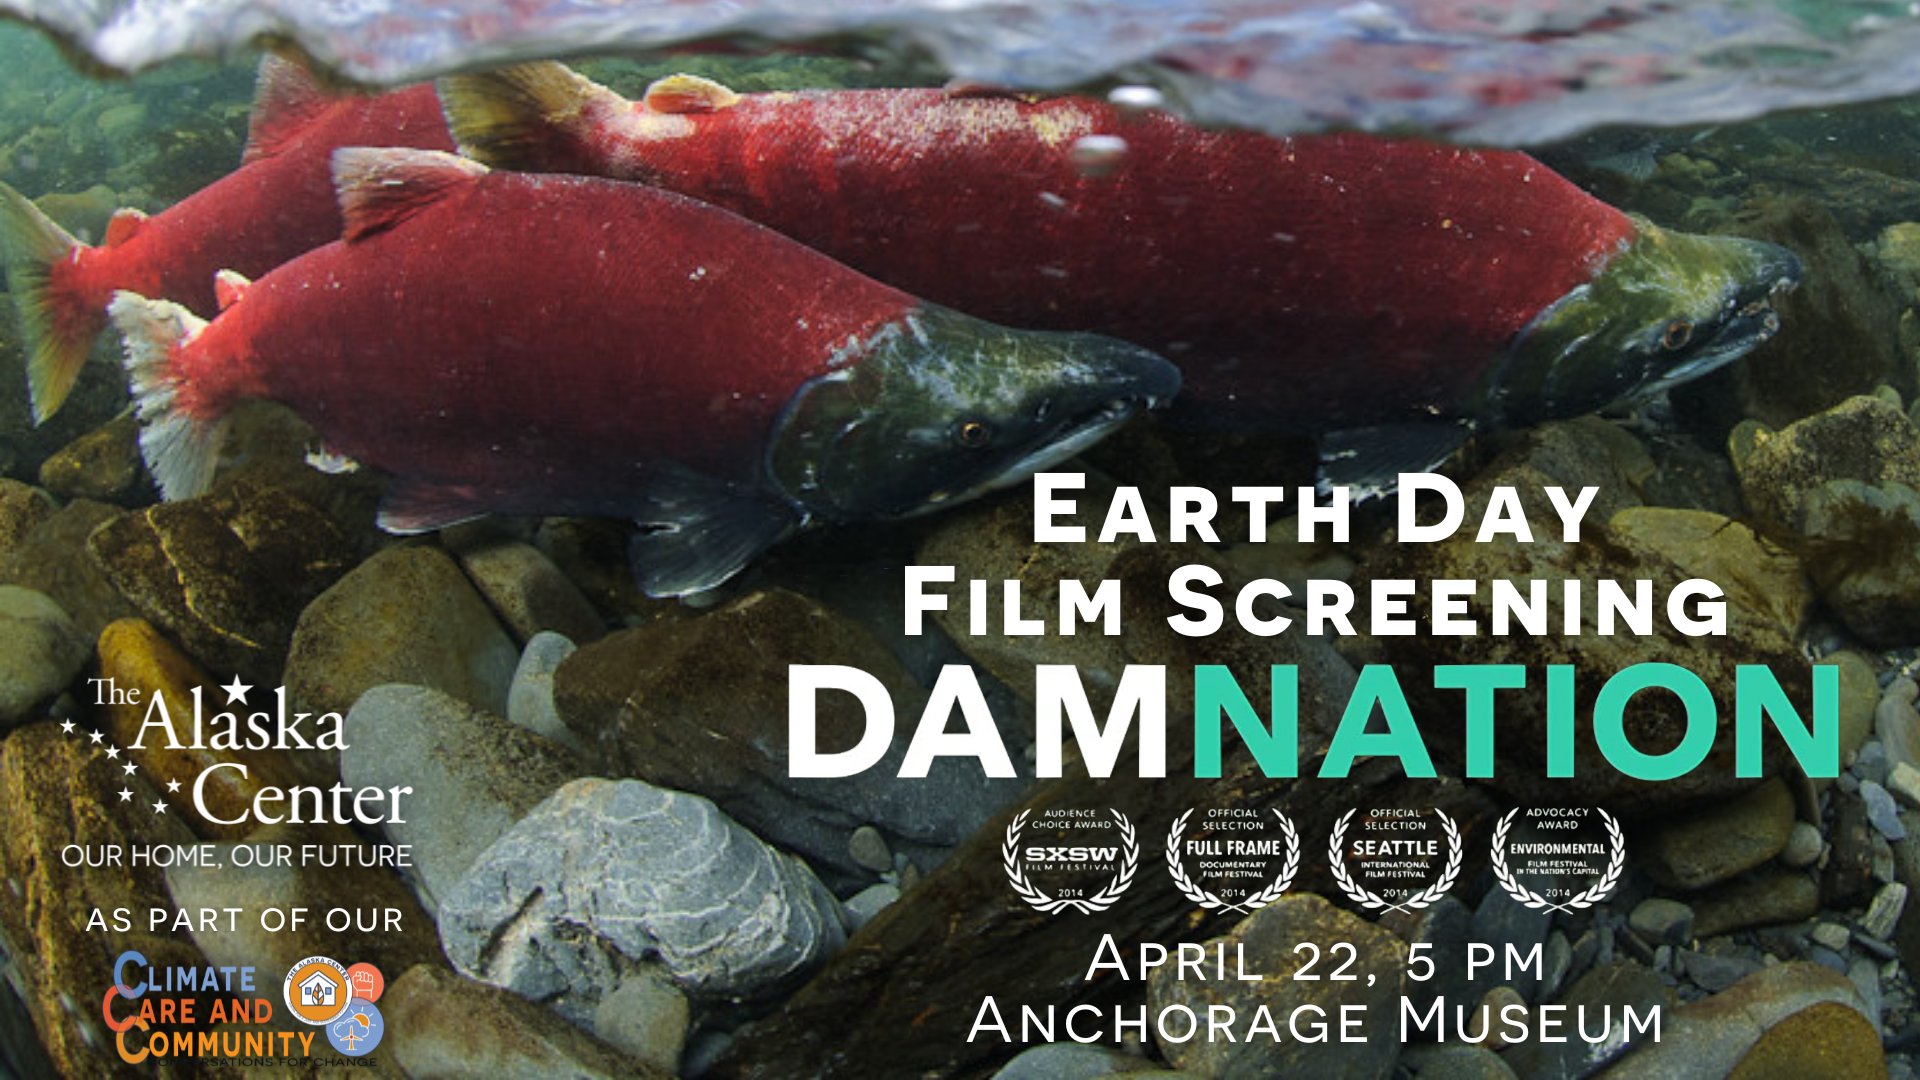 Earth Day Film Screening DamNation April 22 5pm at The Anchorage Museum